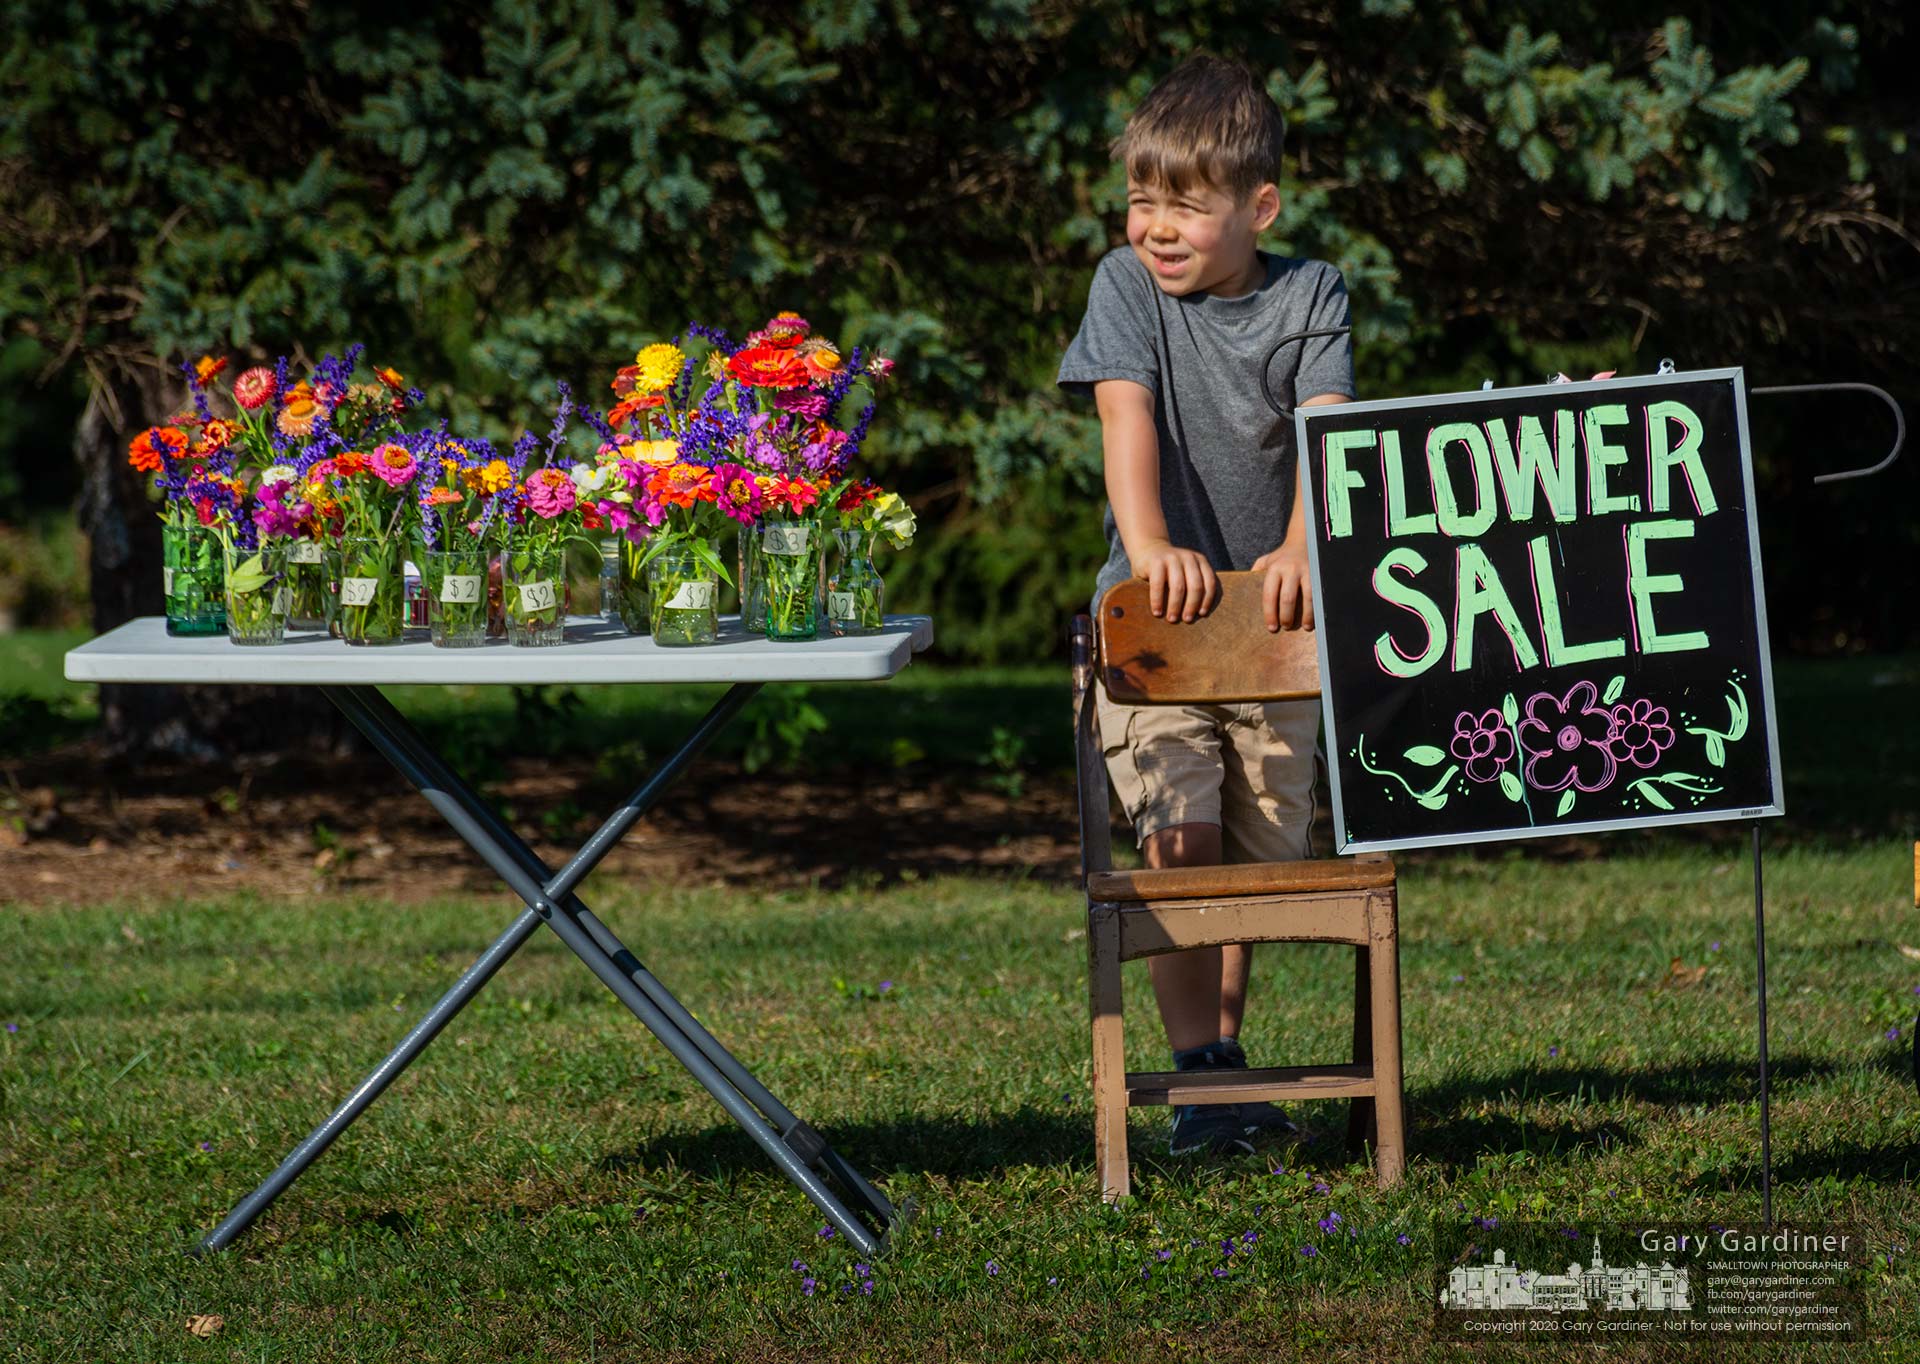 Six-year-old Clayton waits patiently for the next customer at his roadside florist shop in the front yard of his grandmother's home on East College. My Final Photo for Oct. 7, 2020.